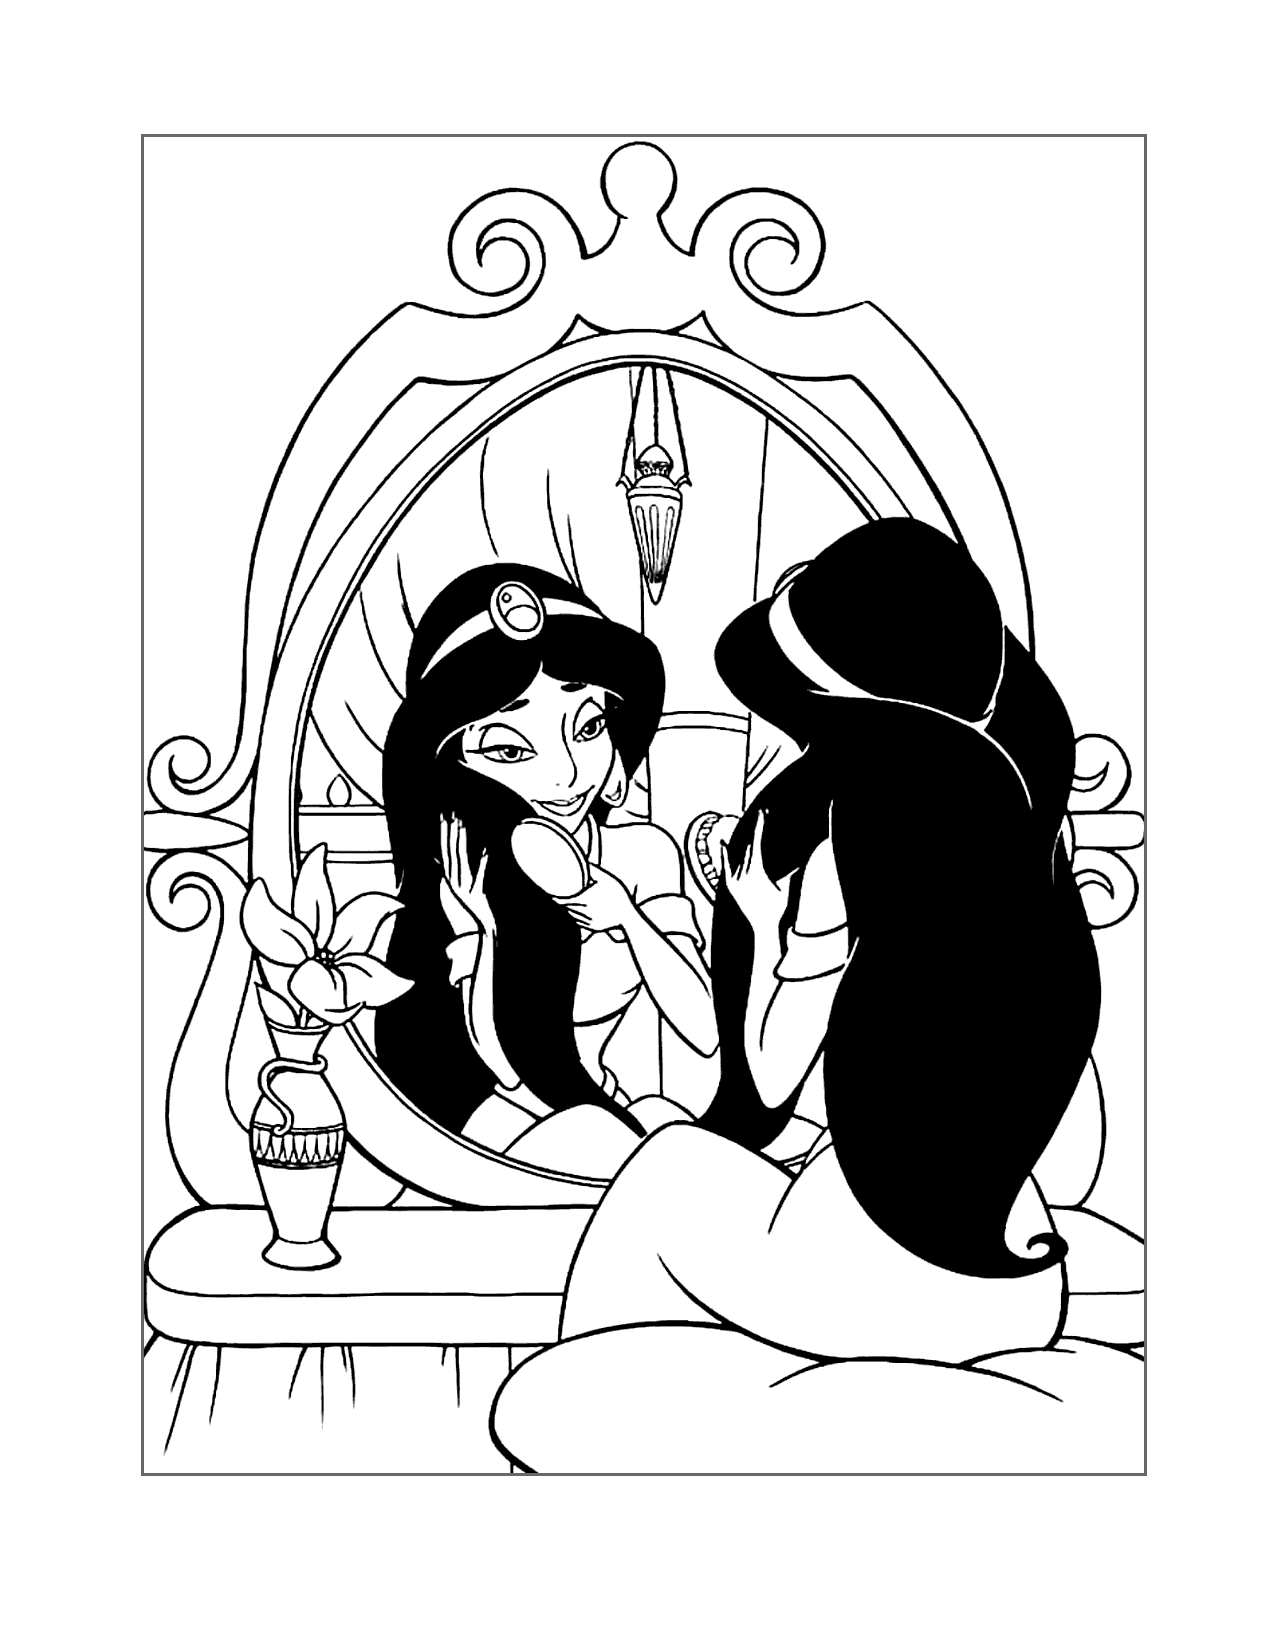 Princess Jasmine Brushes Her Hair Coloring Page